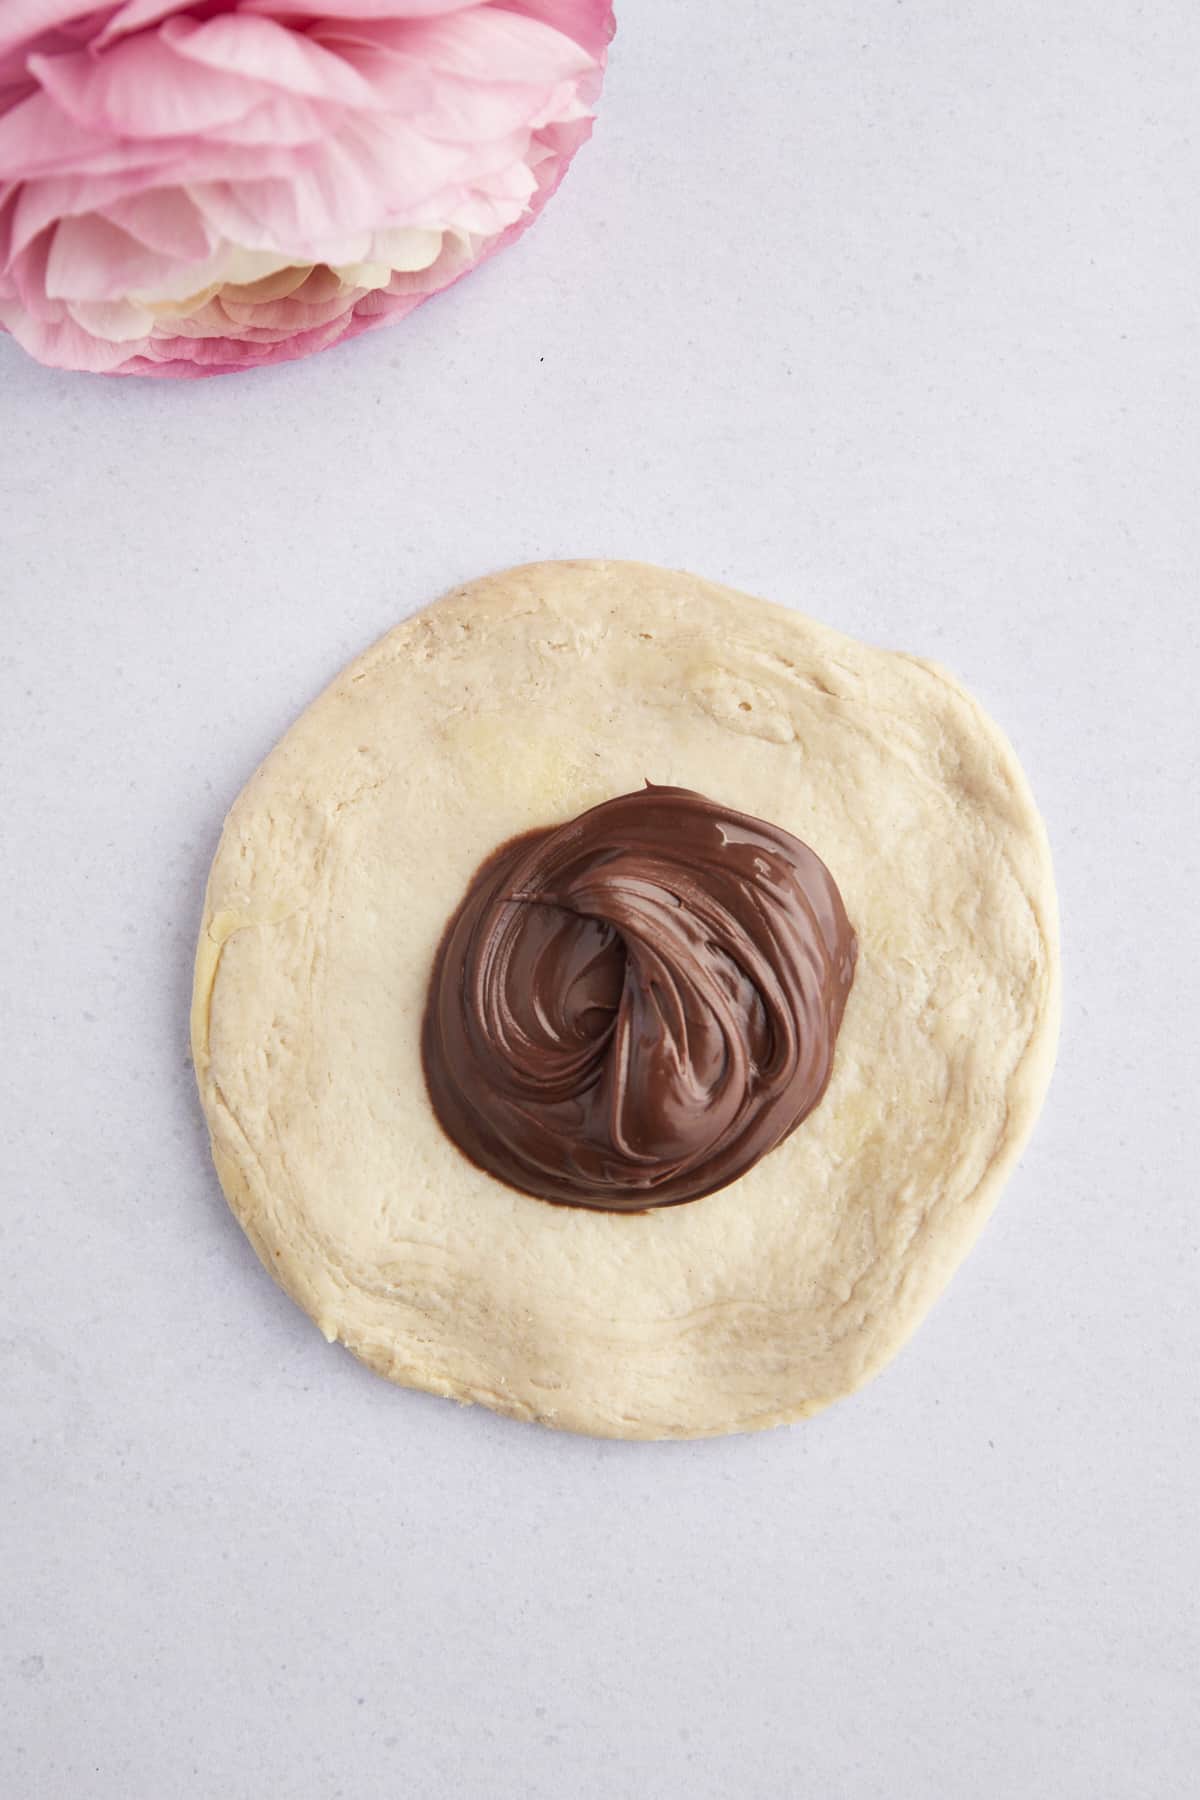 Raw biscuit dough flattened into a circle with a dollop of Nutella in the center. 